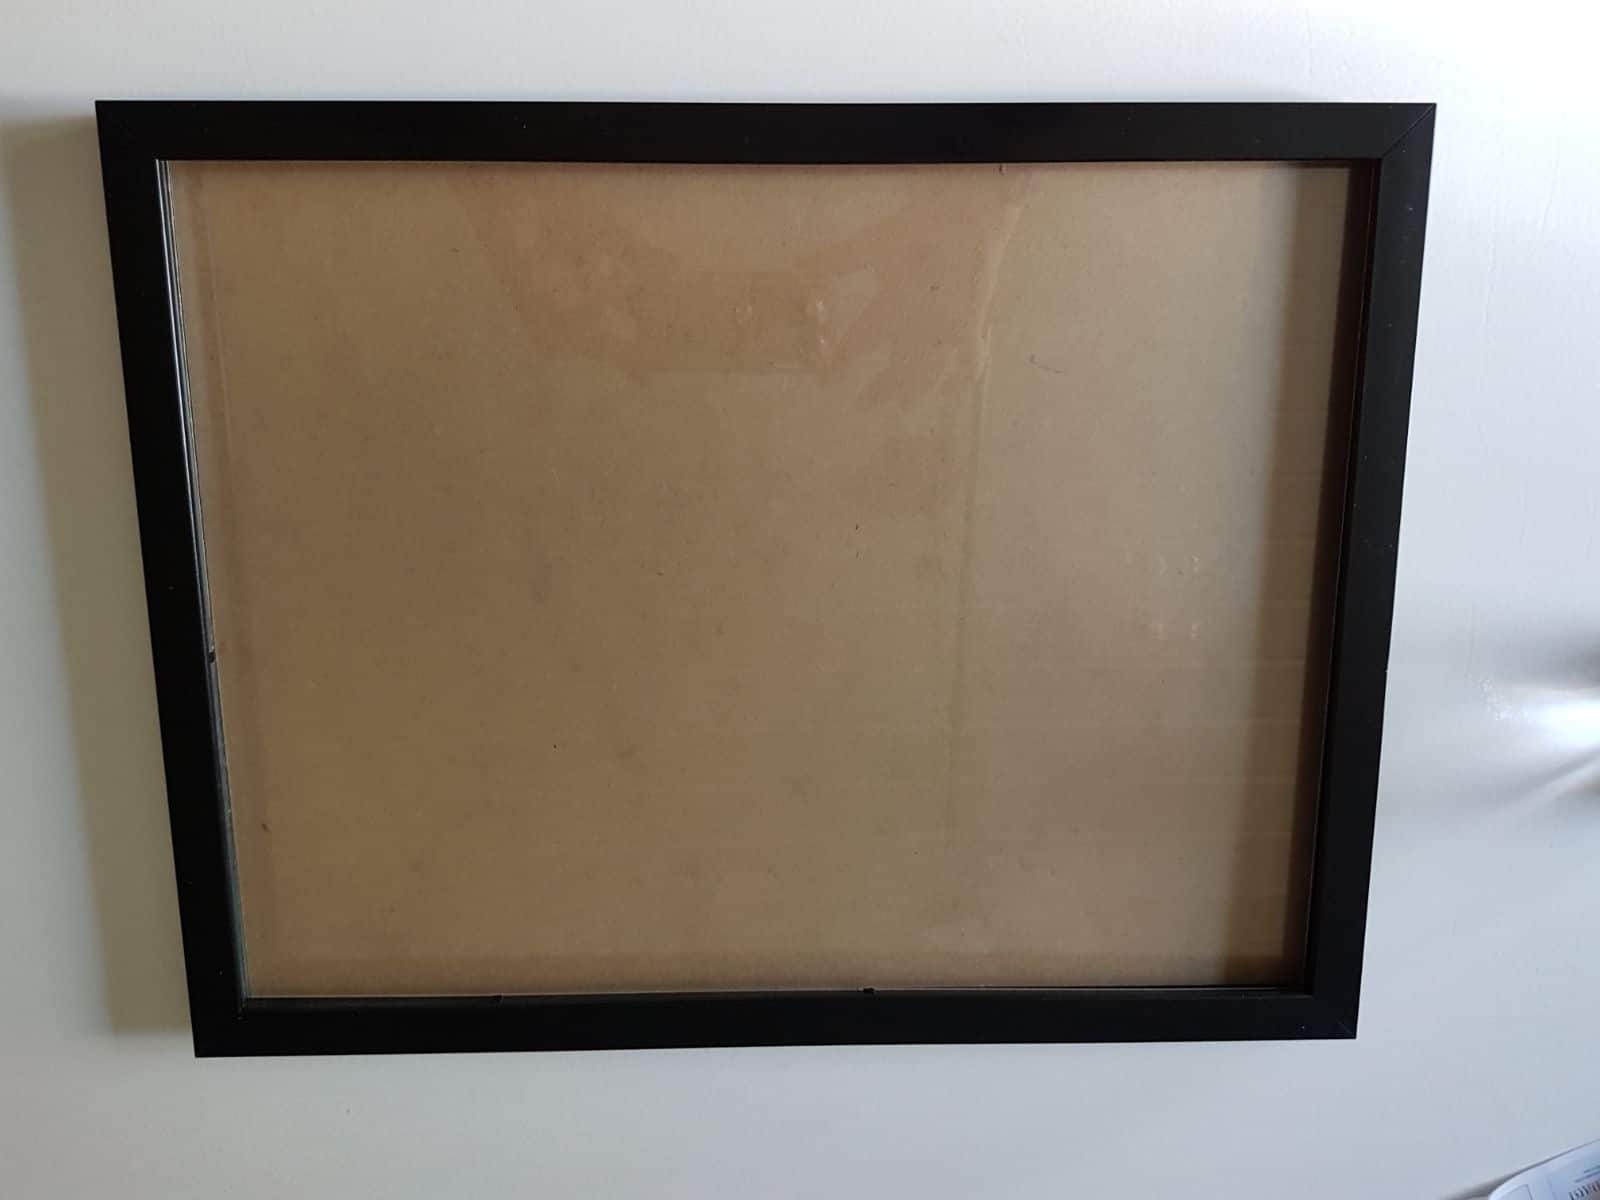 The frame for shadow box